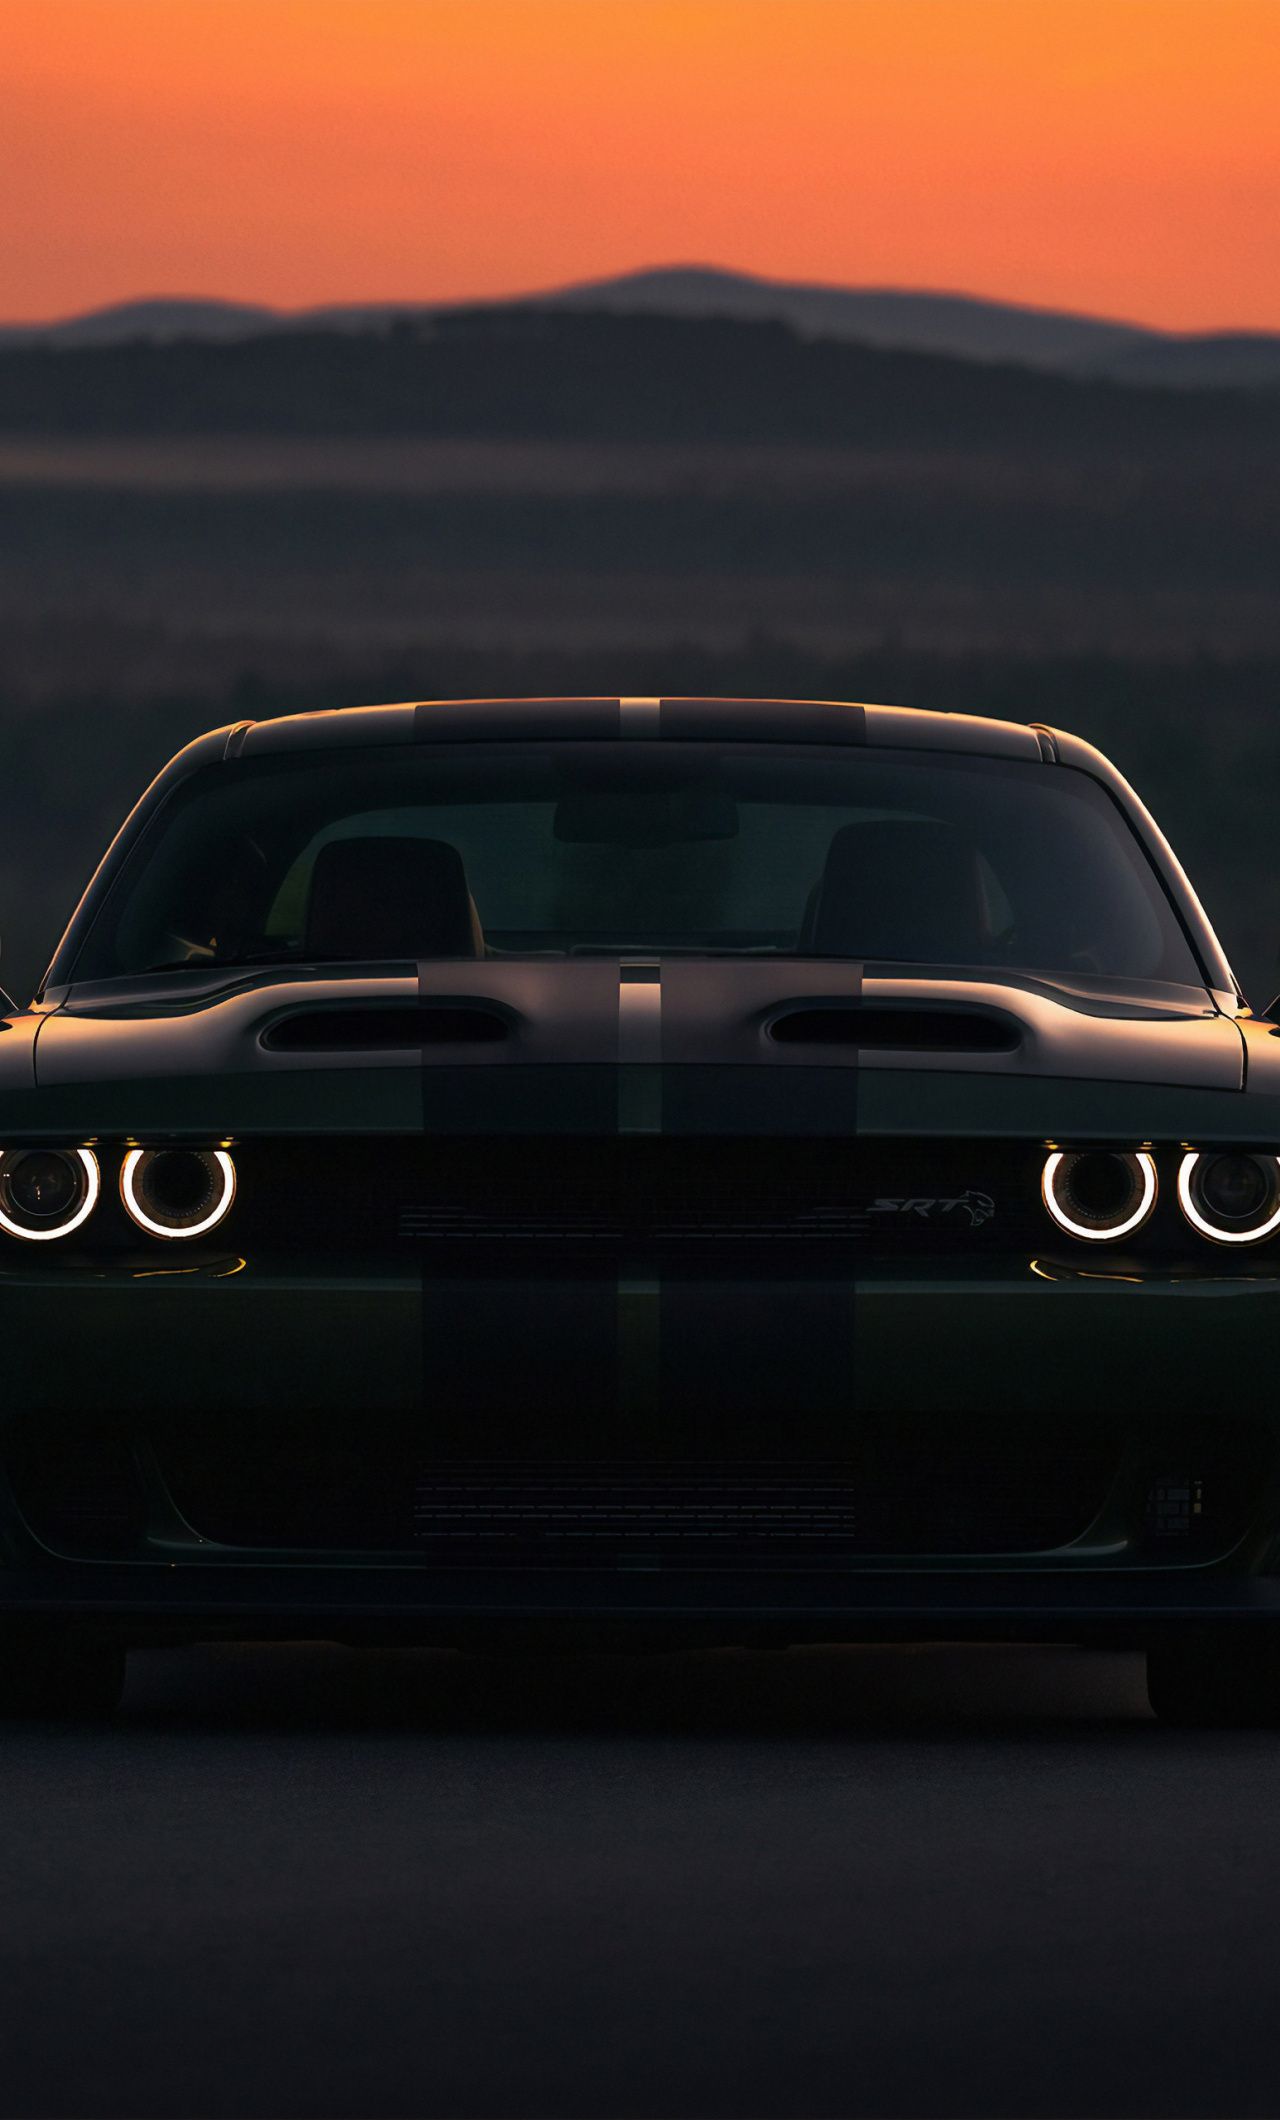 150 Dodge Challenger HD Wallpapers and Backgrounds